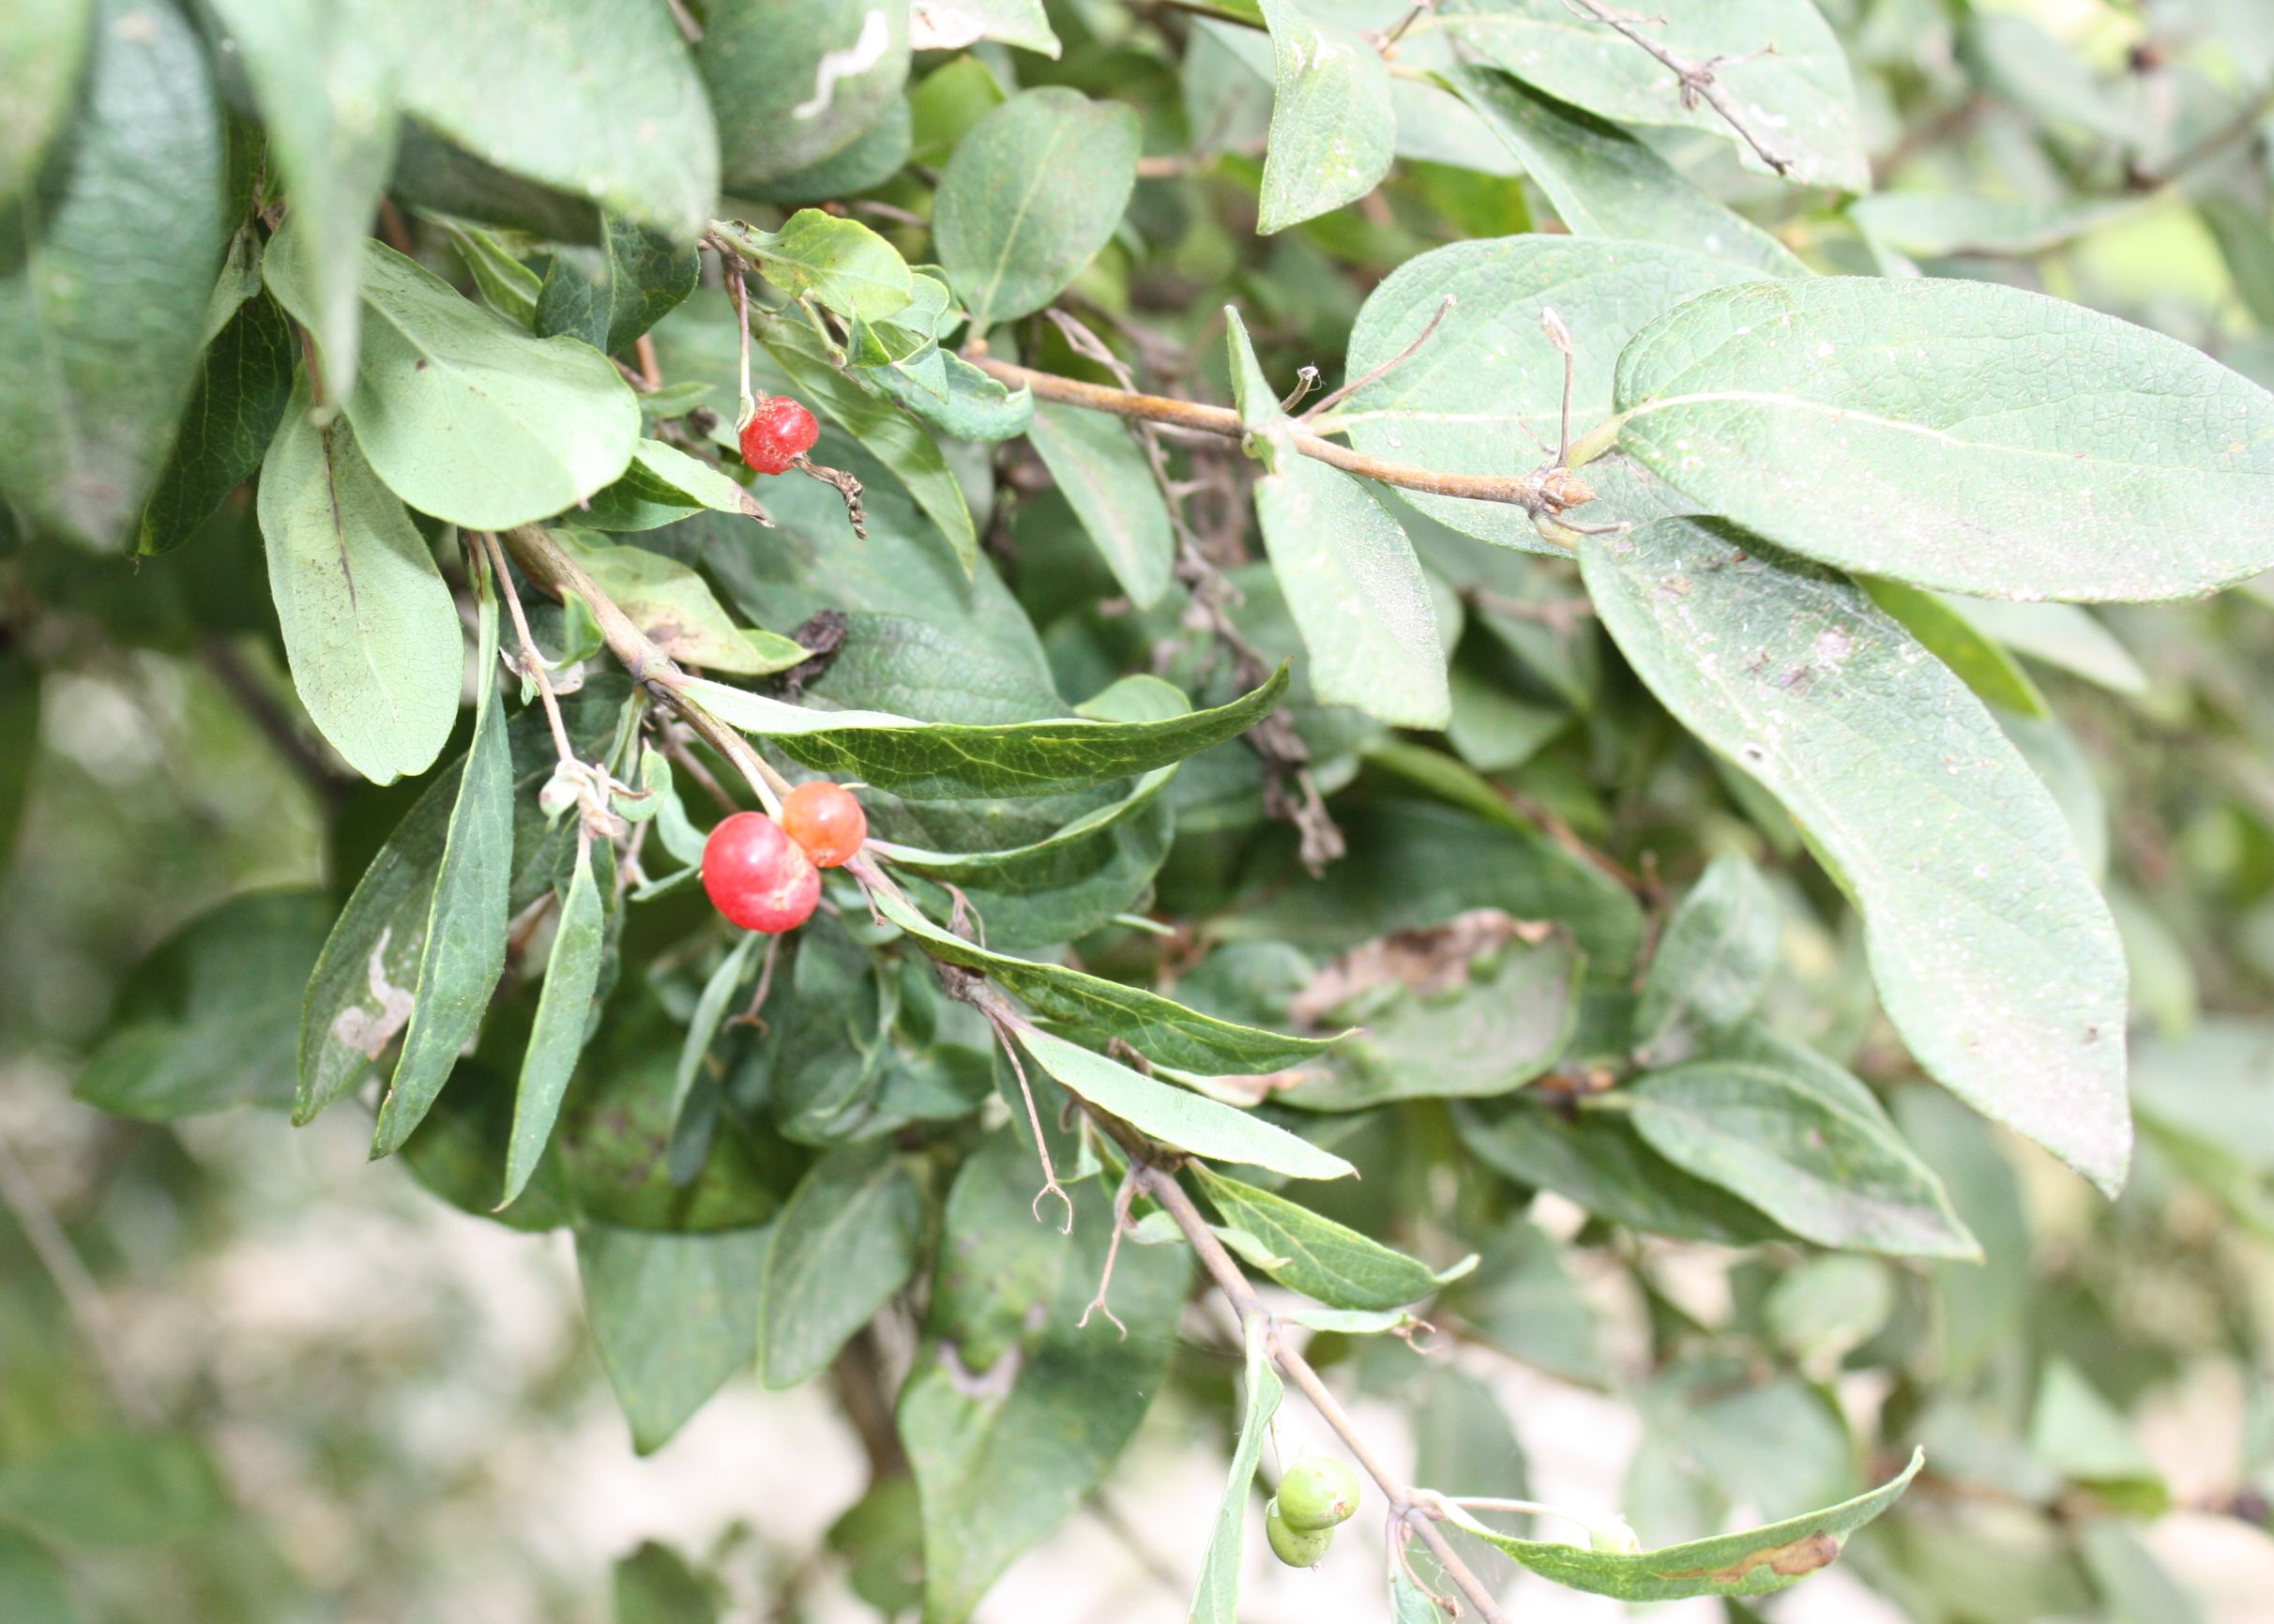 Three small, red berries growing from a branch with green leaves.